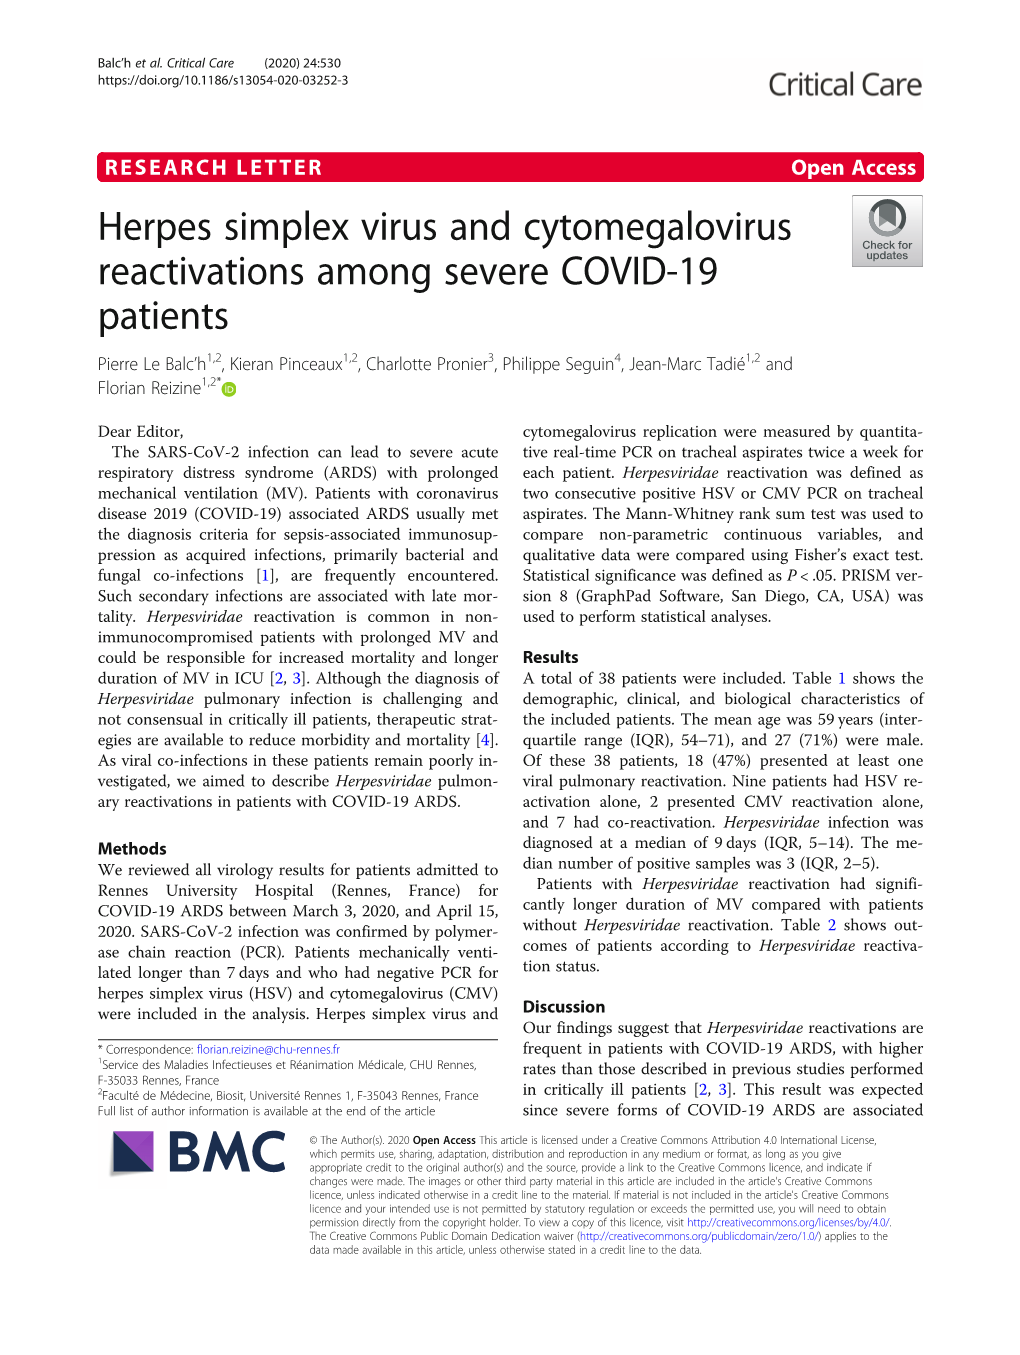 Herpes Simplex Virus and Cytomegalovirus Reactivations